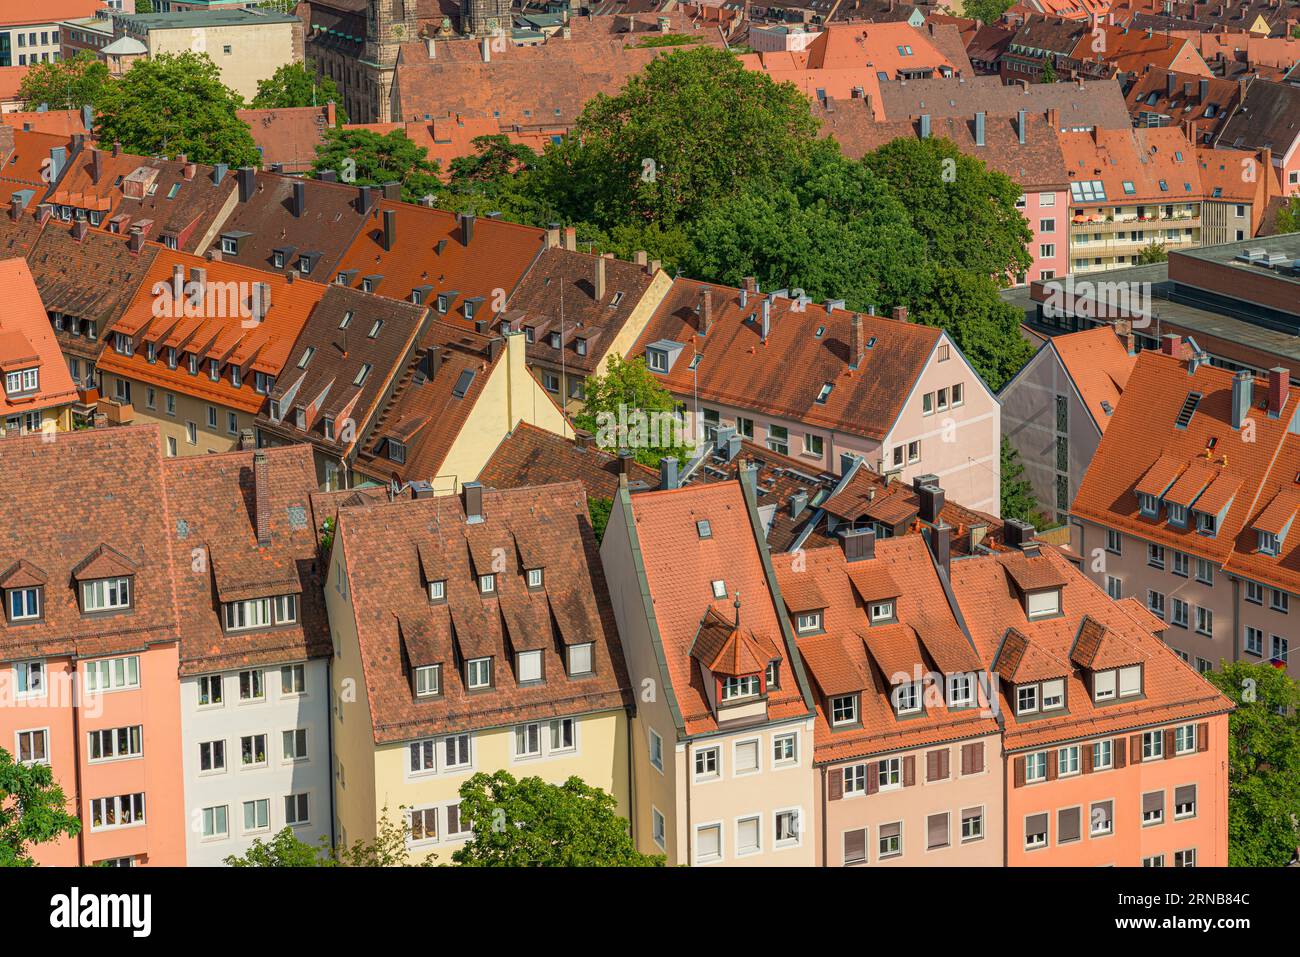 Elevated view of a residential district in Nuremberg city, Germany Stock Photo